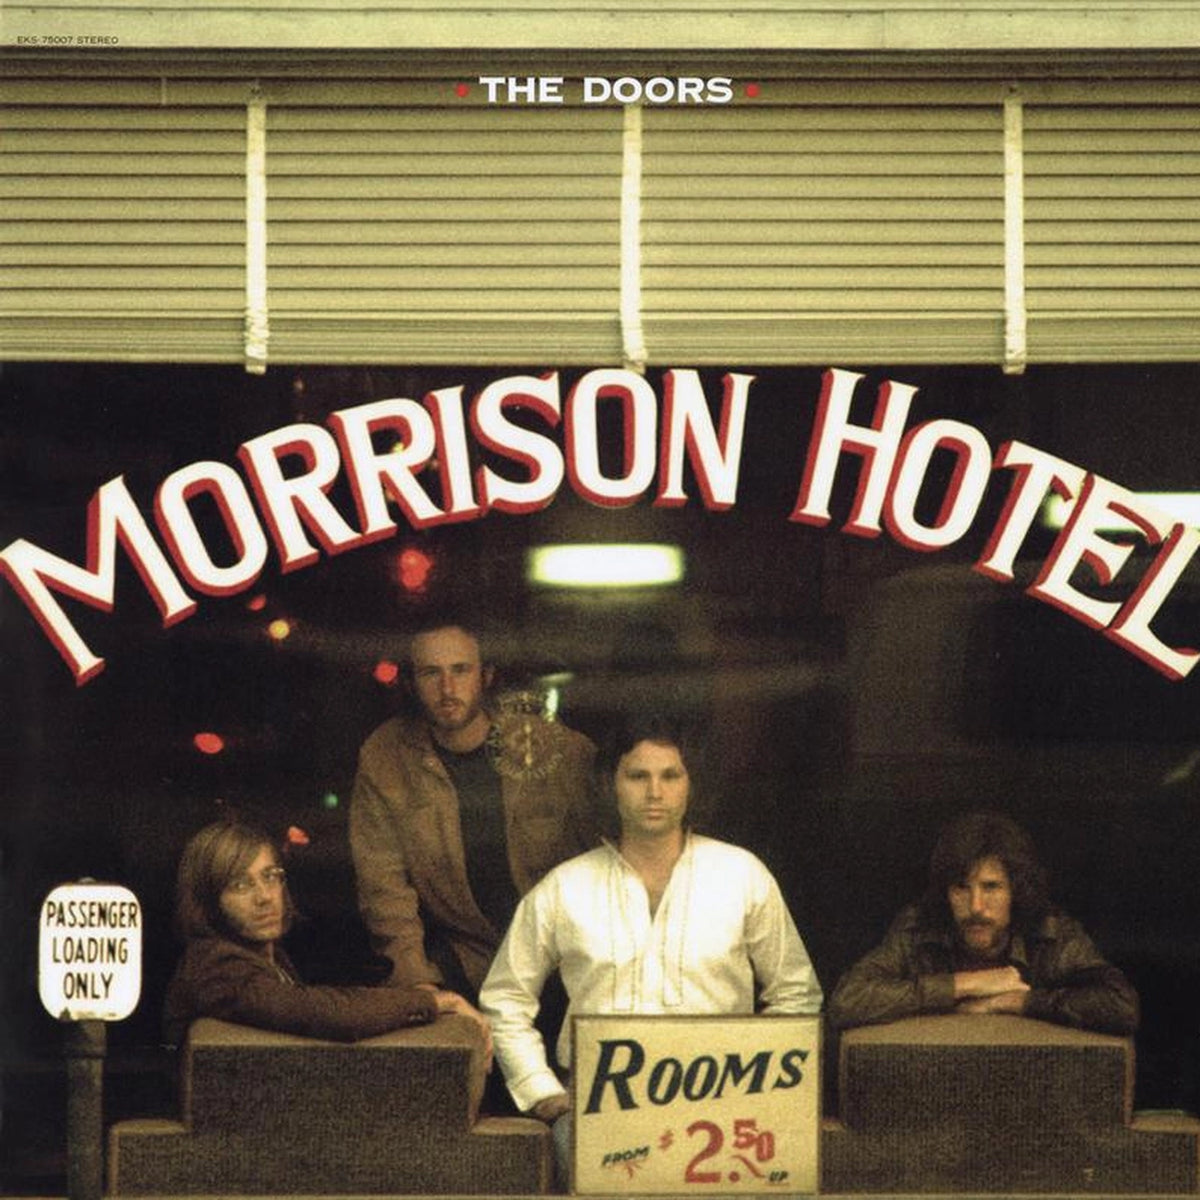 The Doors - Morrison Hotel 2LP (Analogue Productions Reissue, 200g, Remastered, Gatefold, 45rpm, Audiophile)